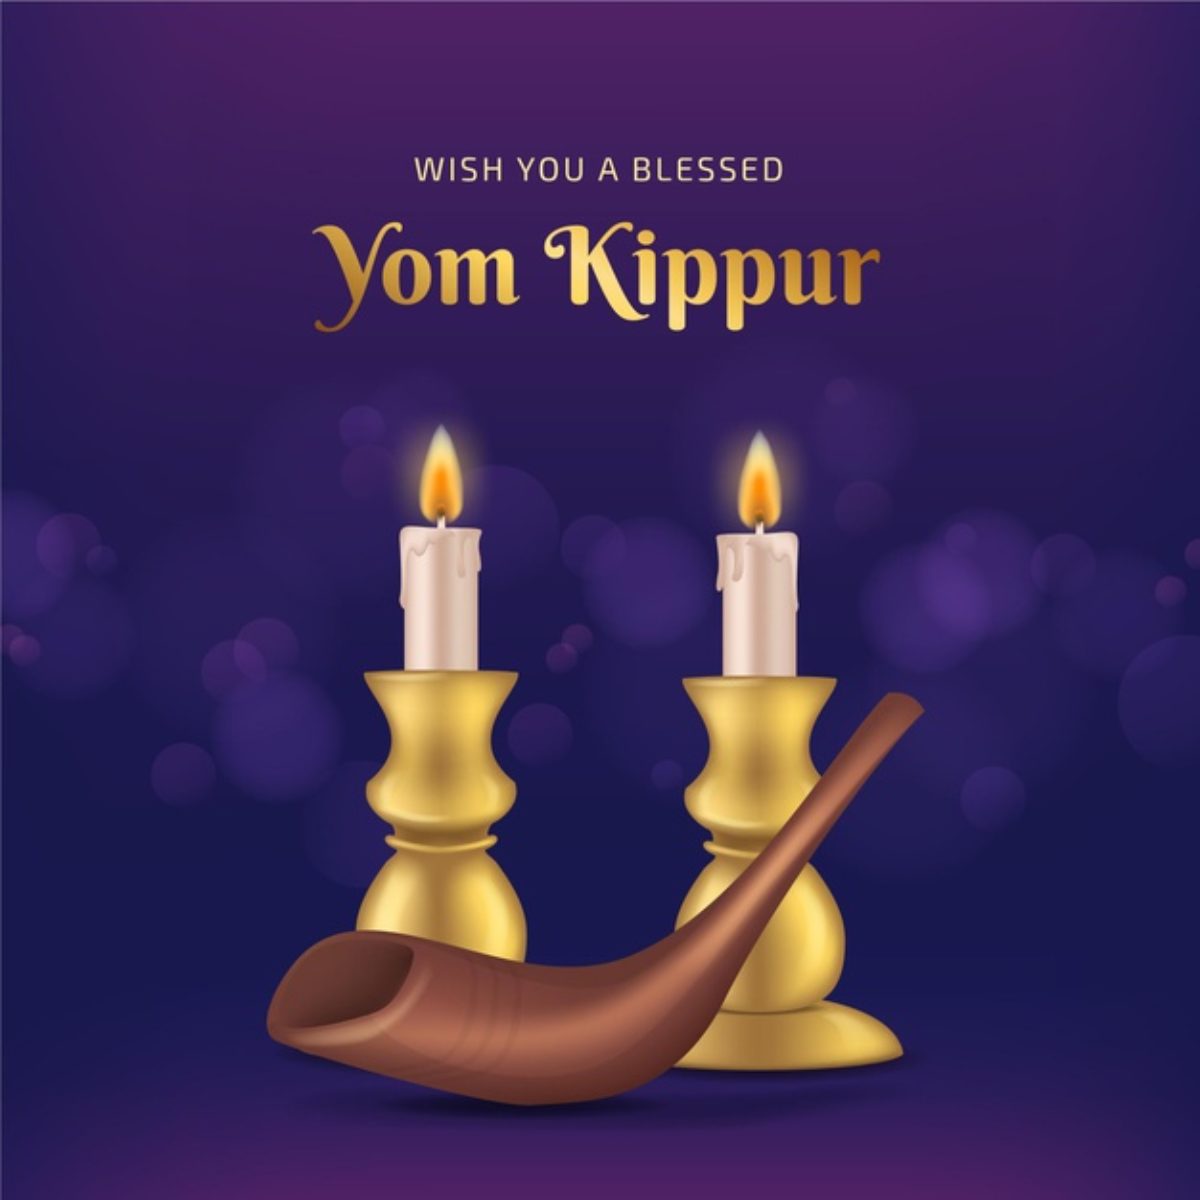 As one of the most significant jewish holidays, yom kippur is more about re...